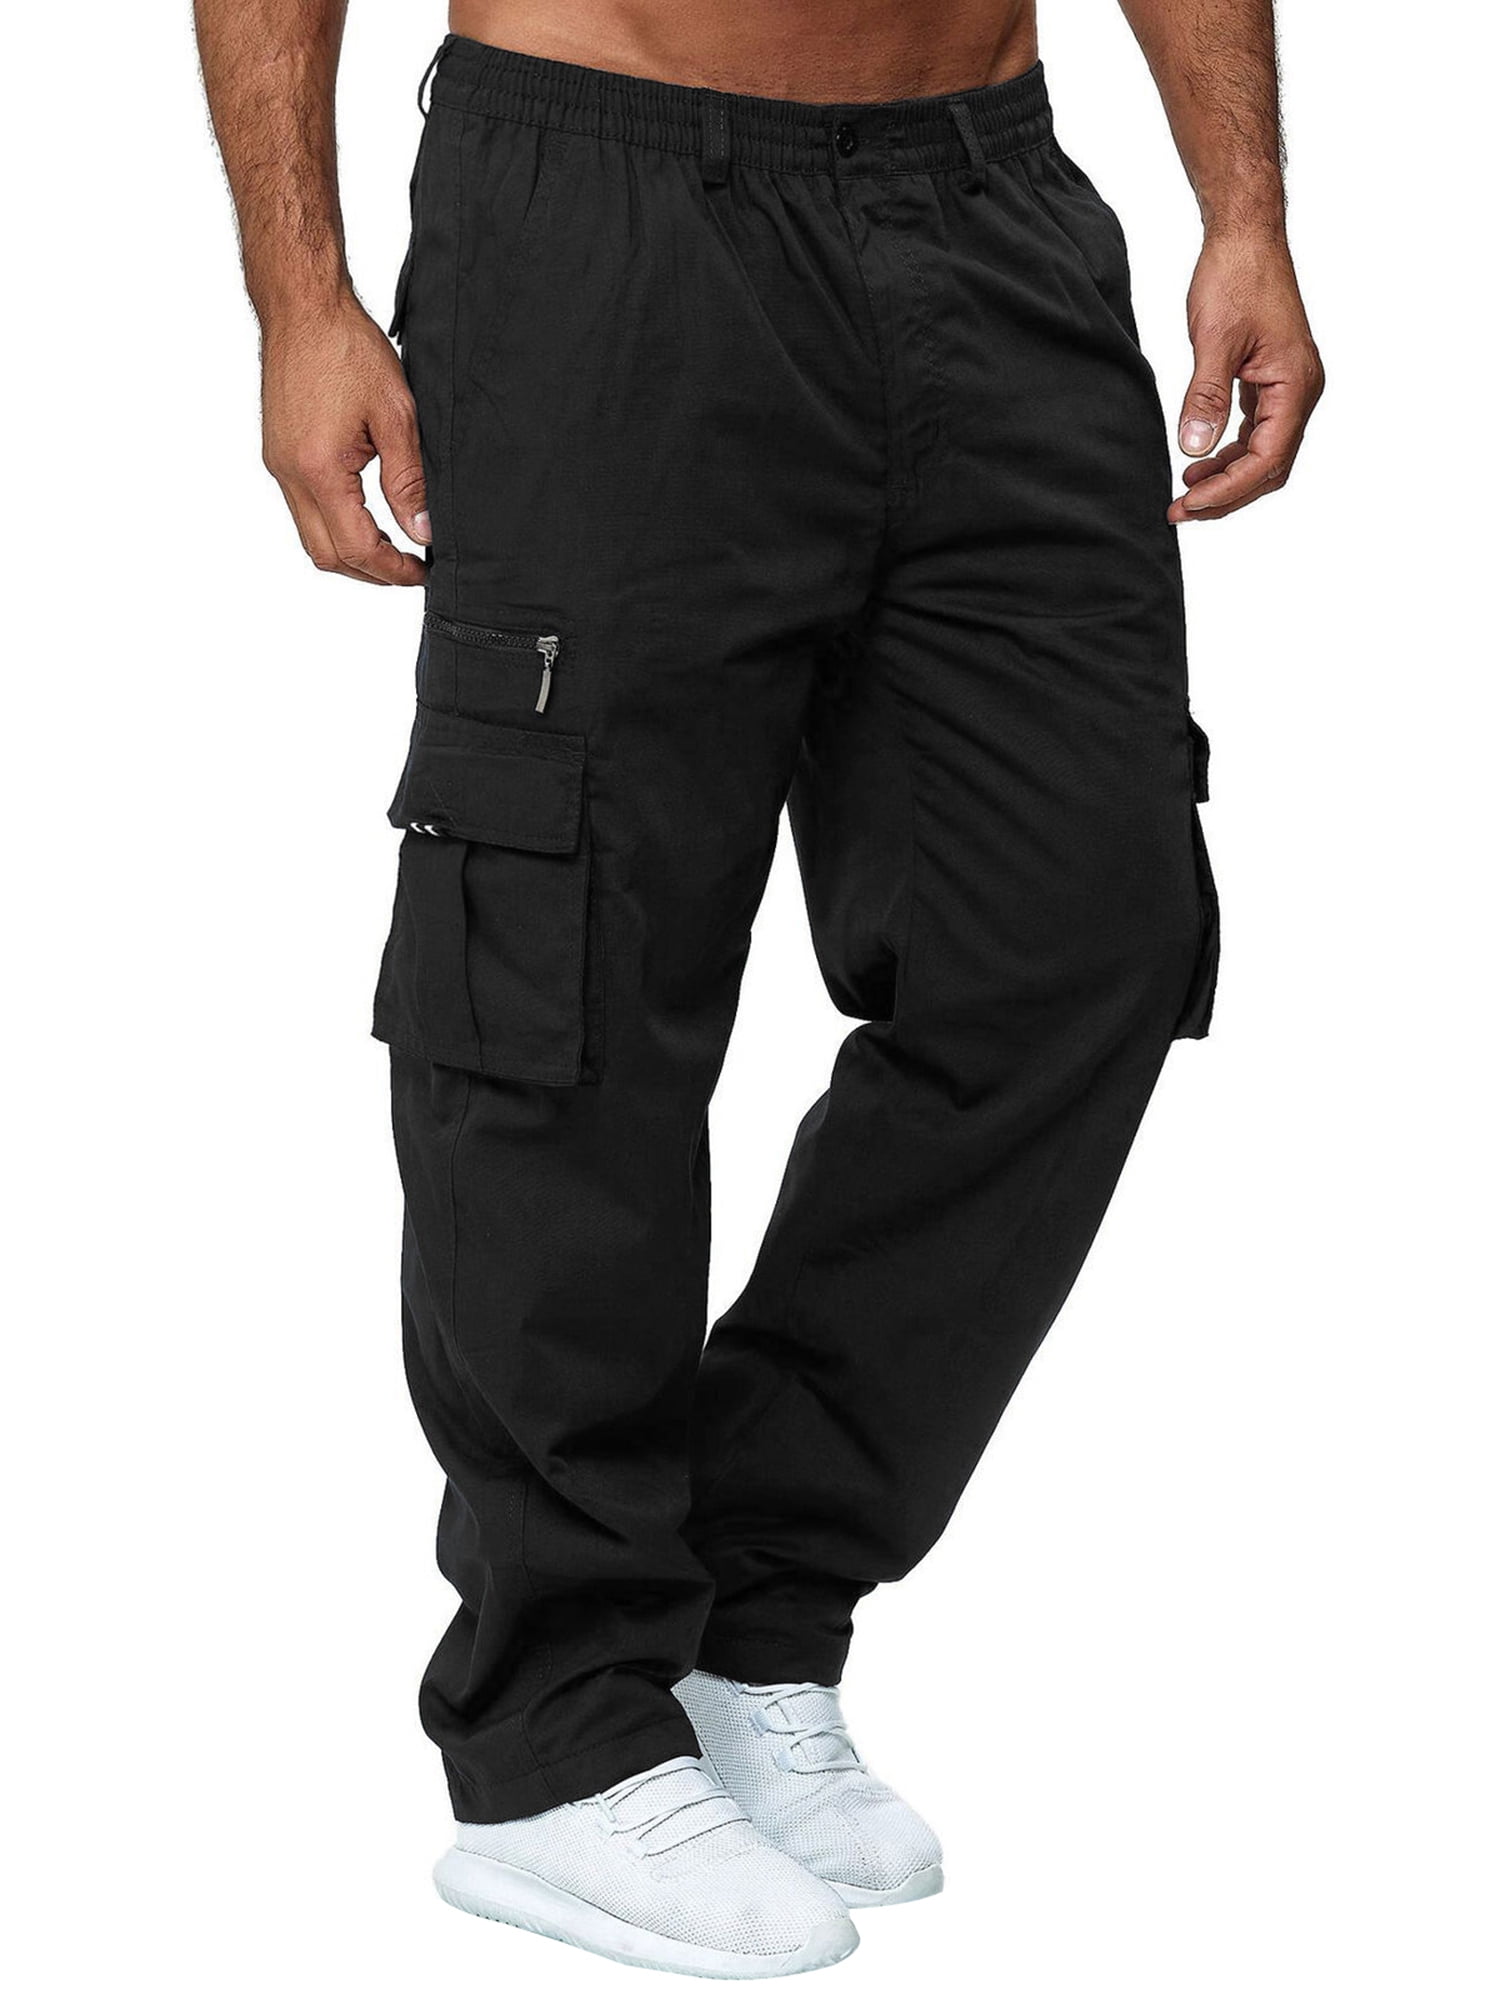 Buy Stylish Black Baggy Cargo Pants Mens at Great Price Online-baongoctrading.com.vn